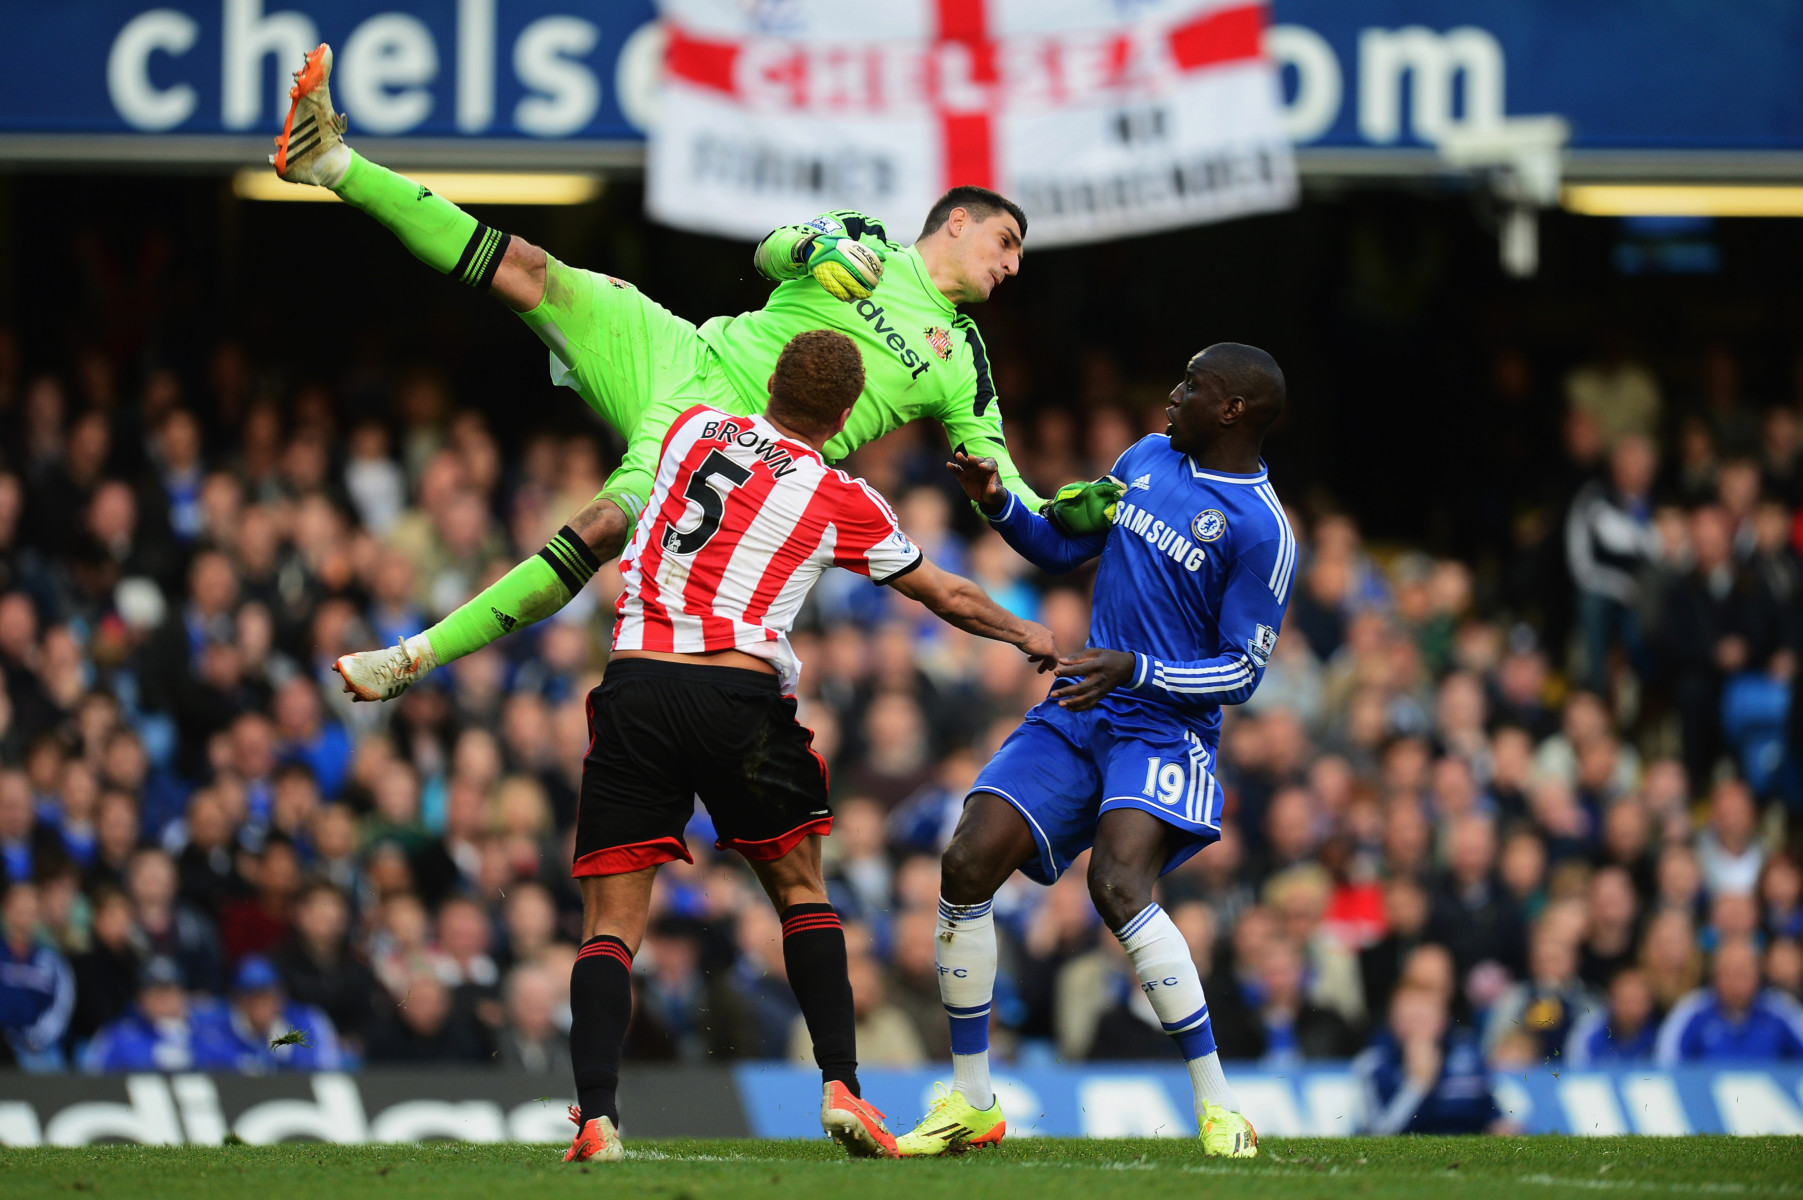 , Inflicting Mourinho’s first ever home Prem defeat at Chelsea was ‘like winning trophy’ says Sunderland hero Vito Mannone